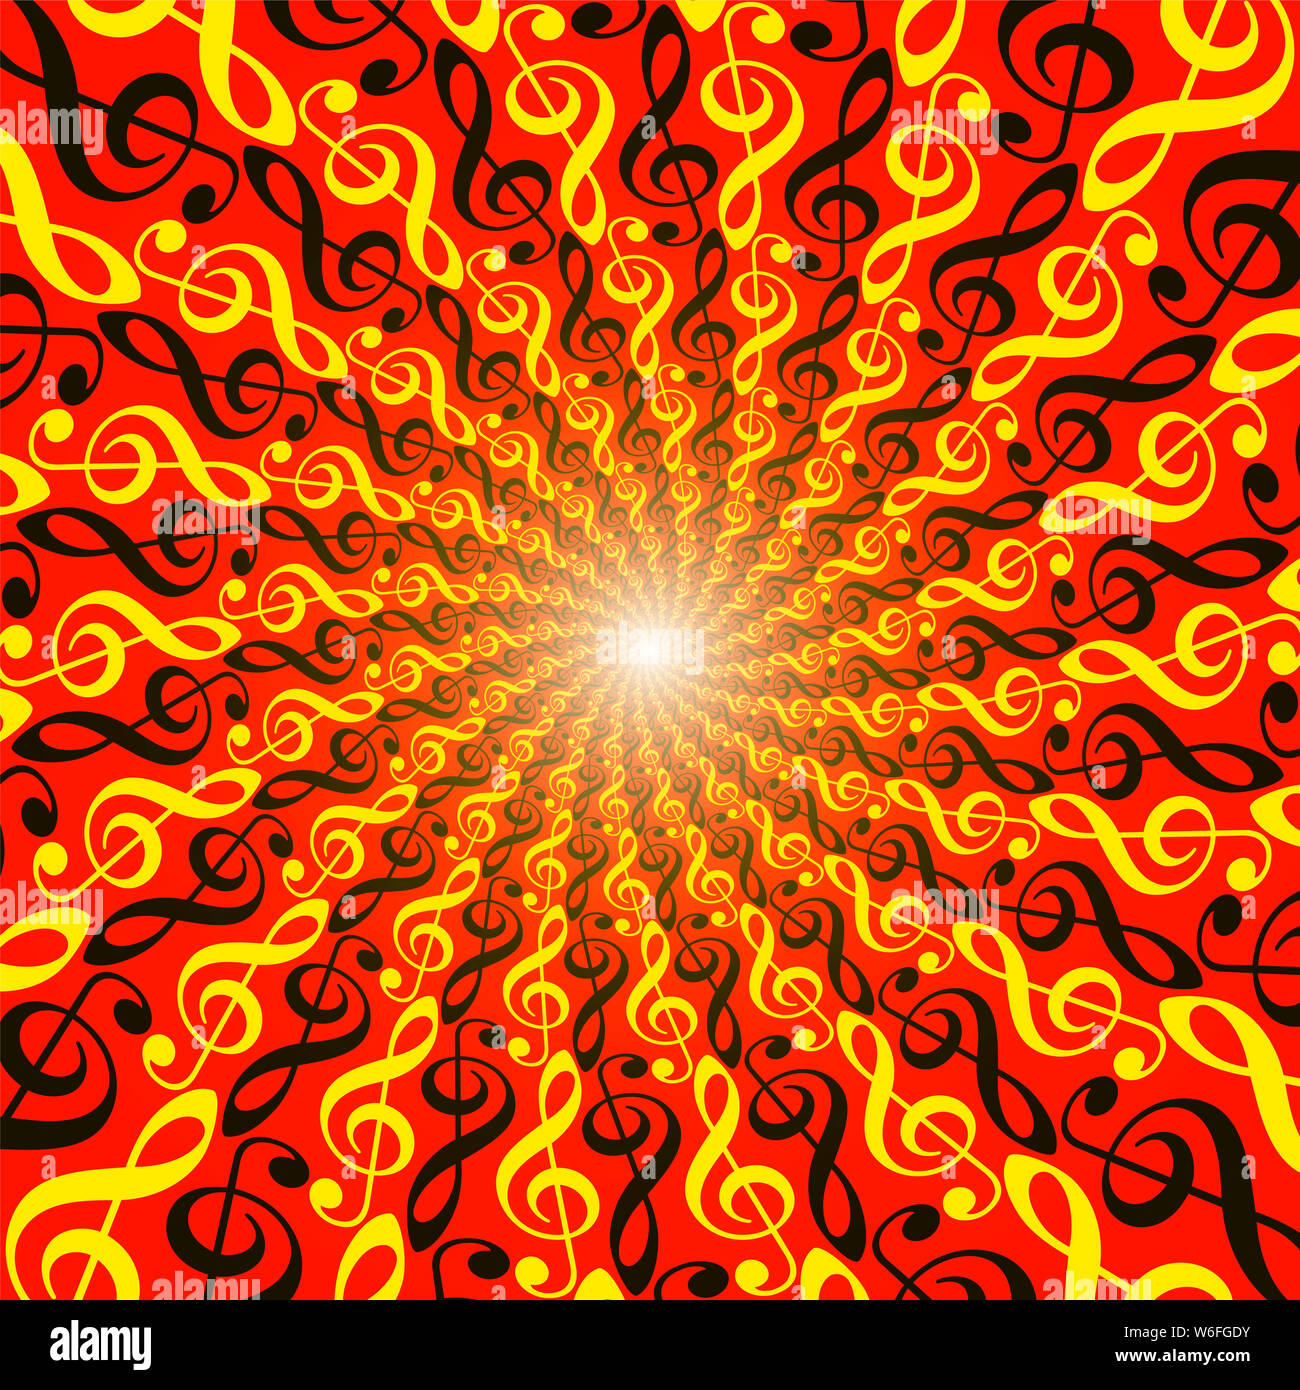 Treble clefs explosion. Powerful spirale pattern, luminous tunnel with shining center. Twisted circular red and yellow fractal background illustration Stock Photo